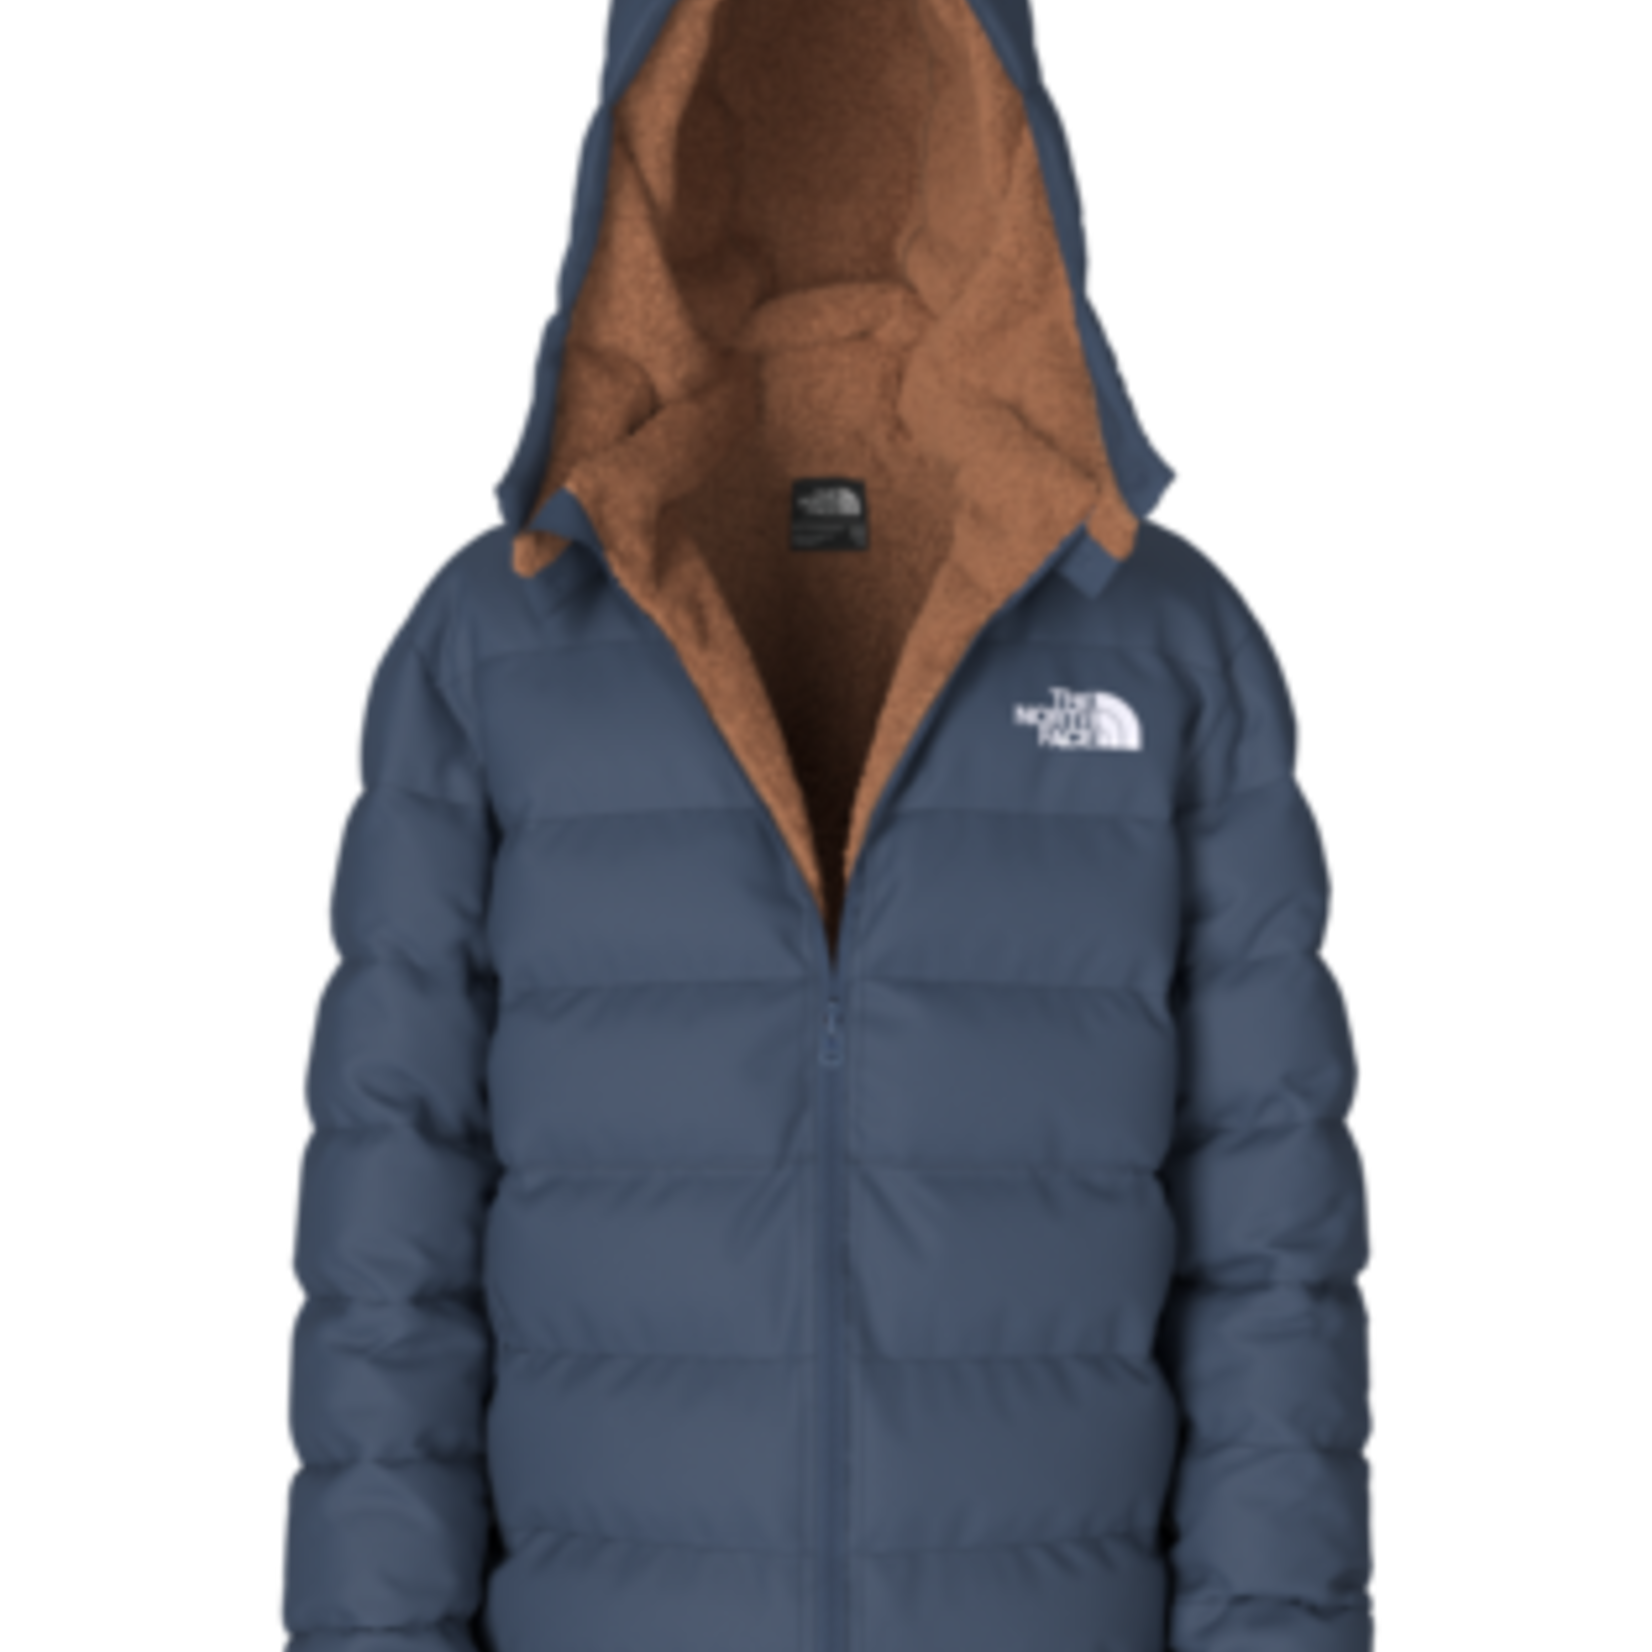 The North Face The North Face Winter Jacket, Reversible Mount Chimbo Full Zip Hooded, Boys